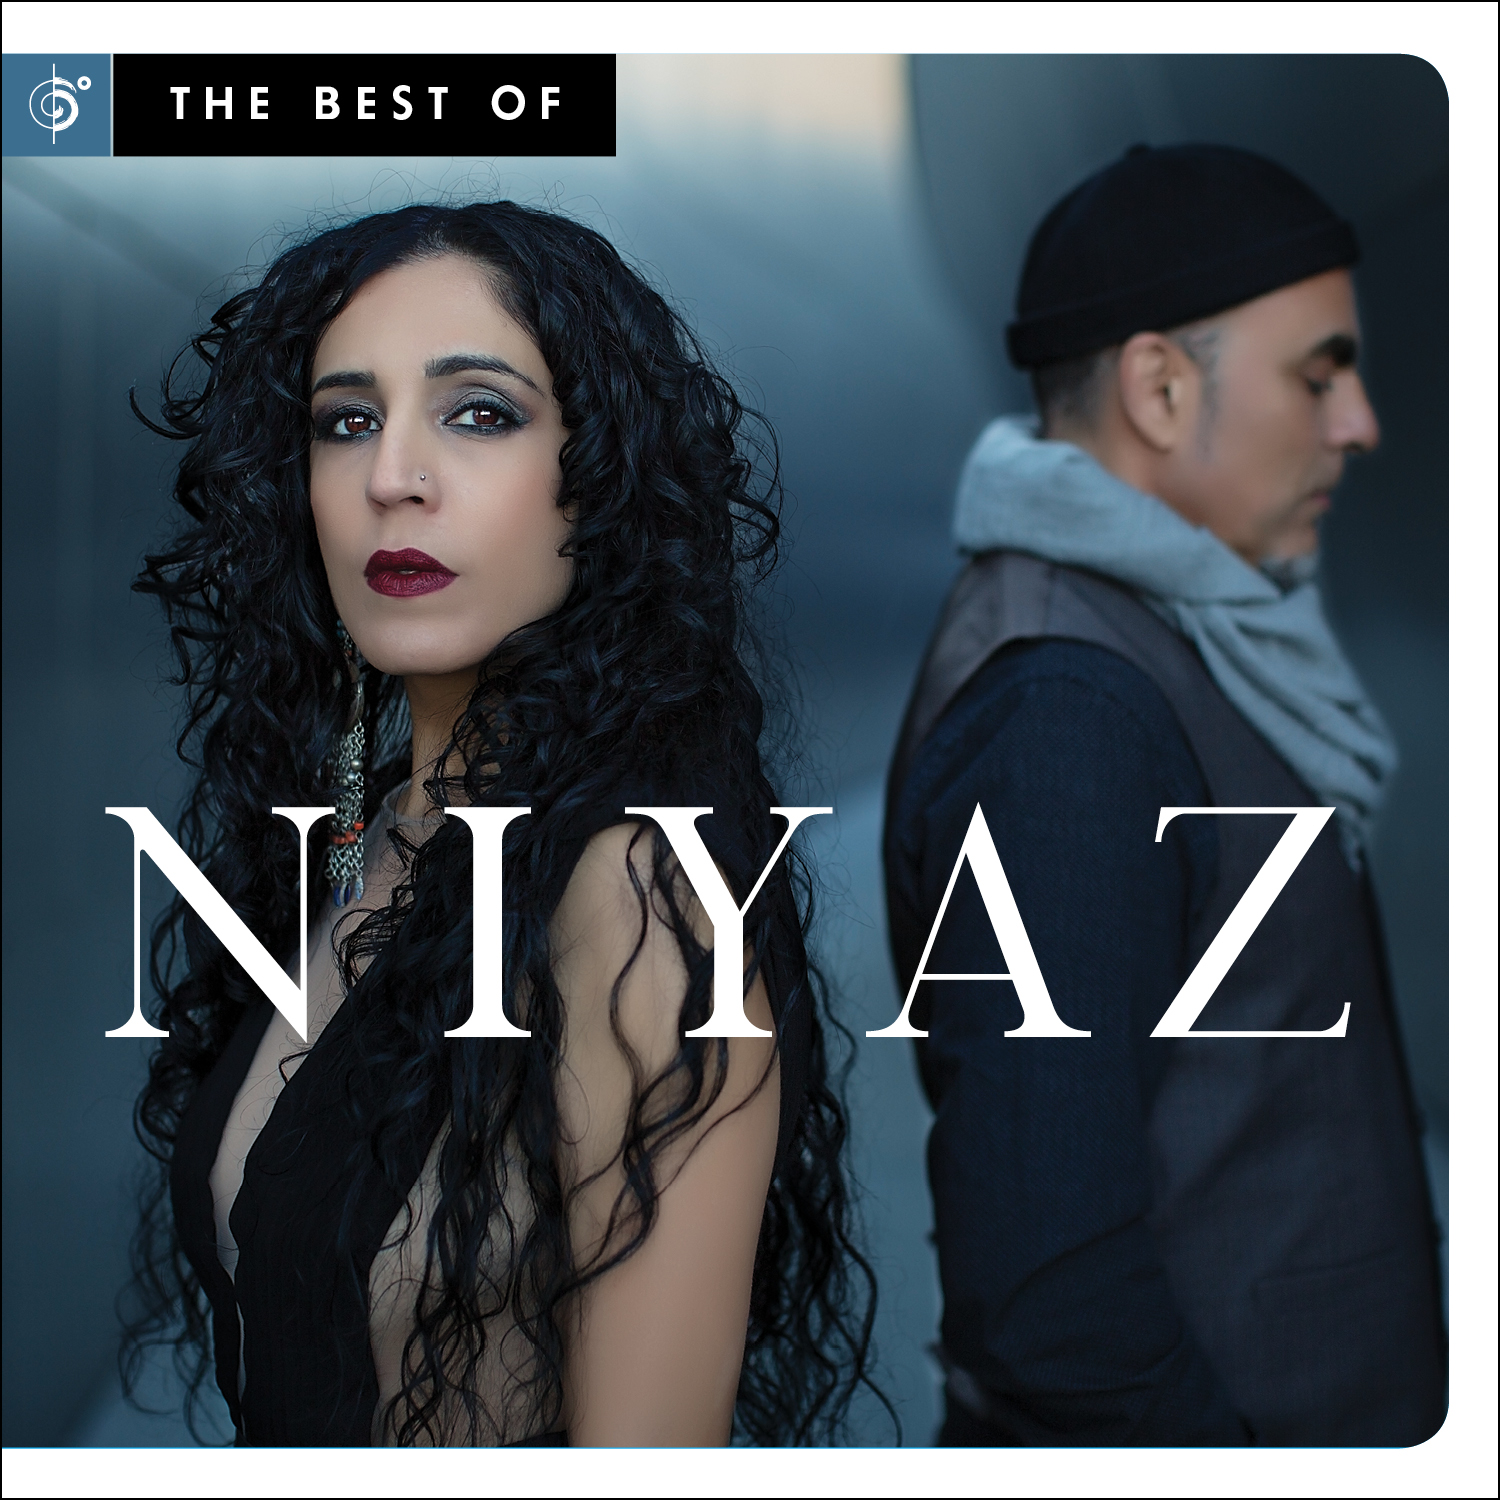 Coming soon: The best of niyaz